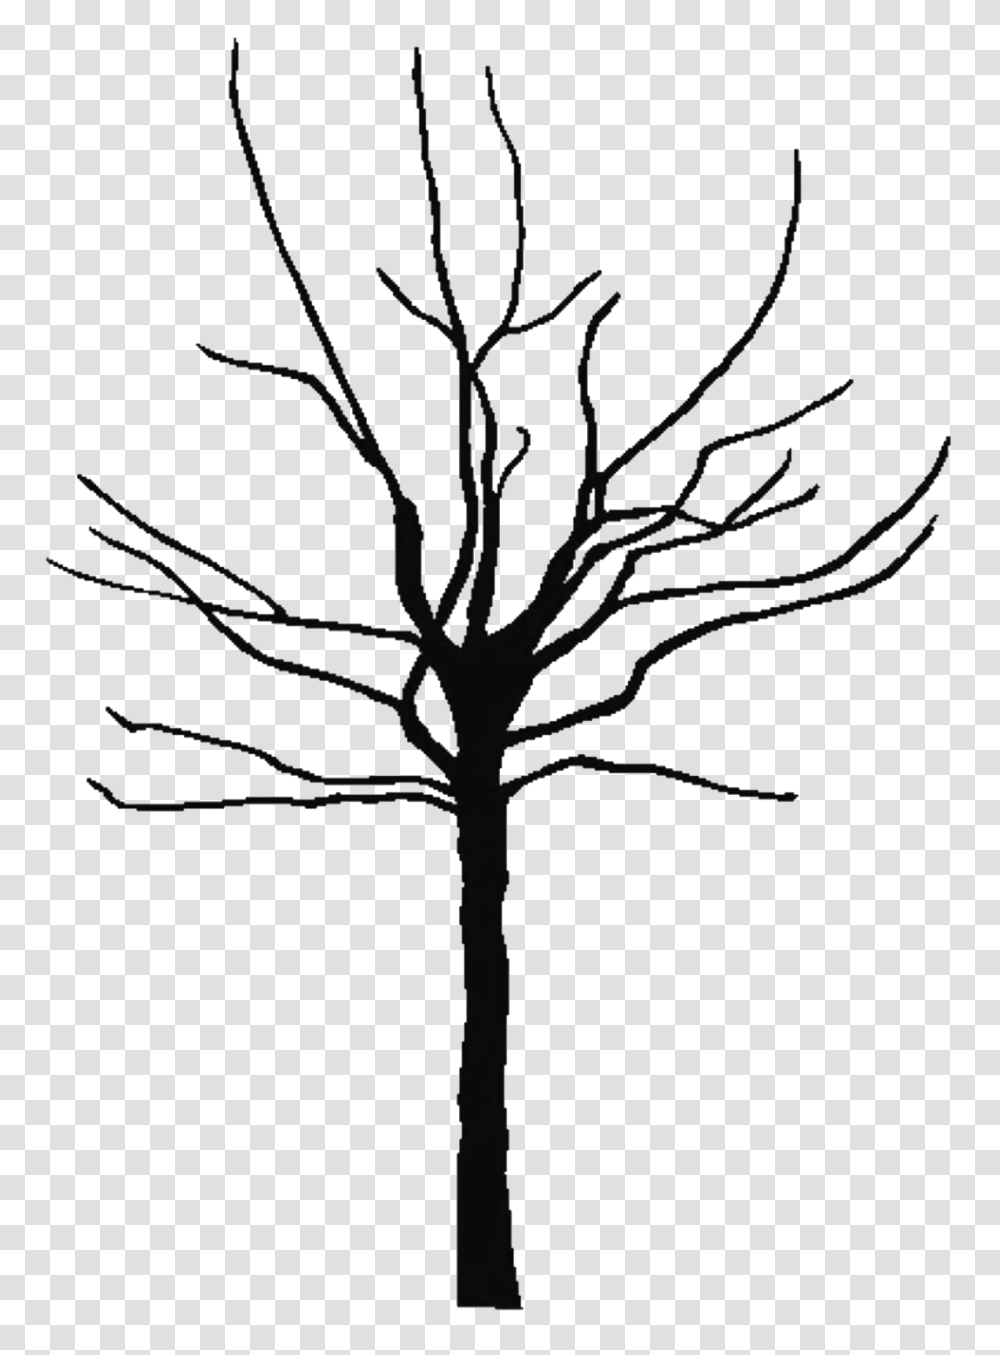 A Dying Tree A Dying Tree Images, Stencil, Silhouette, Plant, White Transparent Png